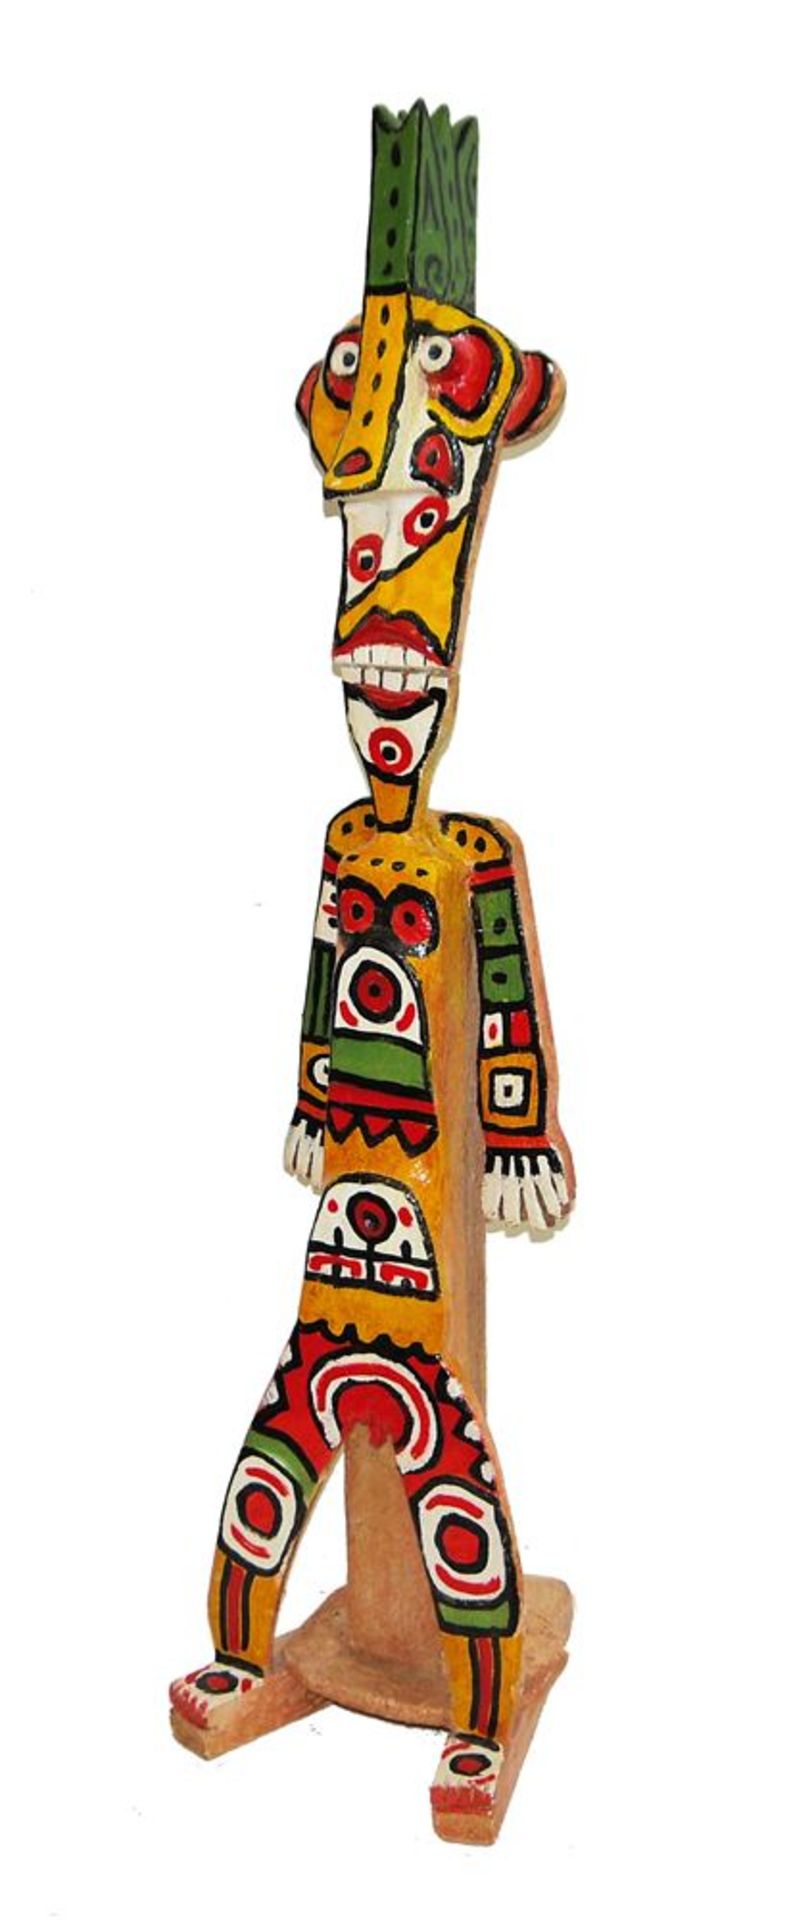 Pete, Standing Man, painted, large sculpture from 2005 in "Tribal art- style ", with dedication